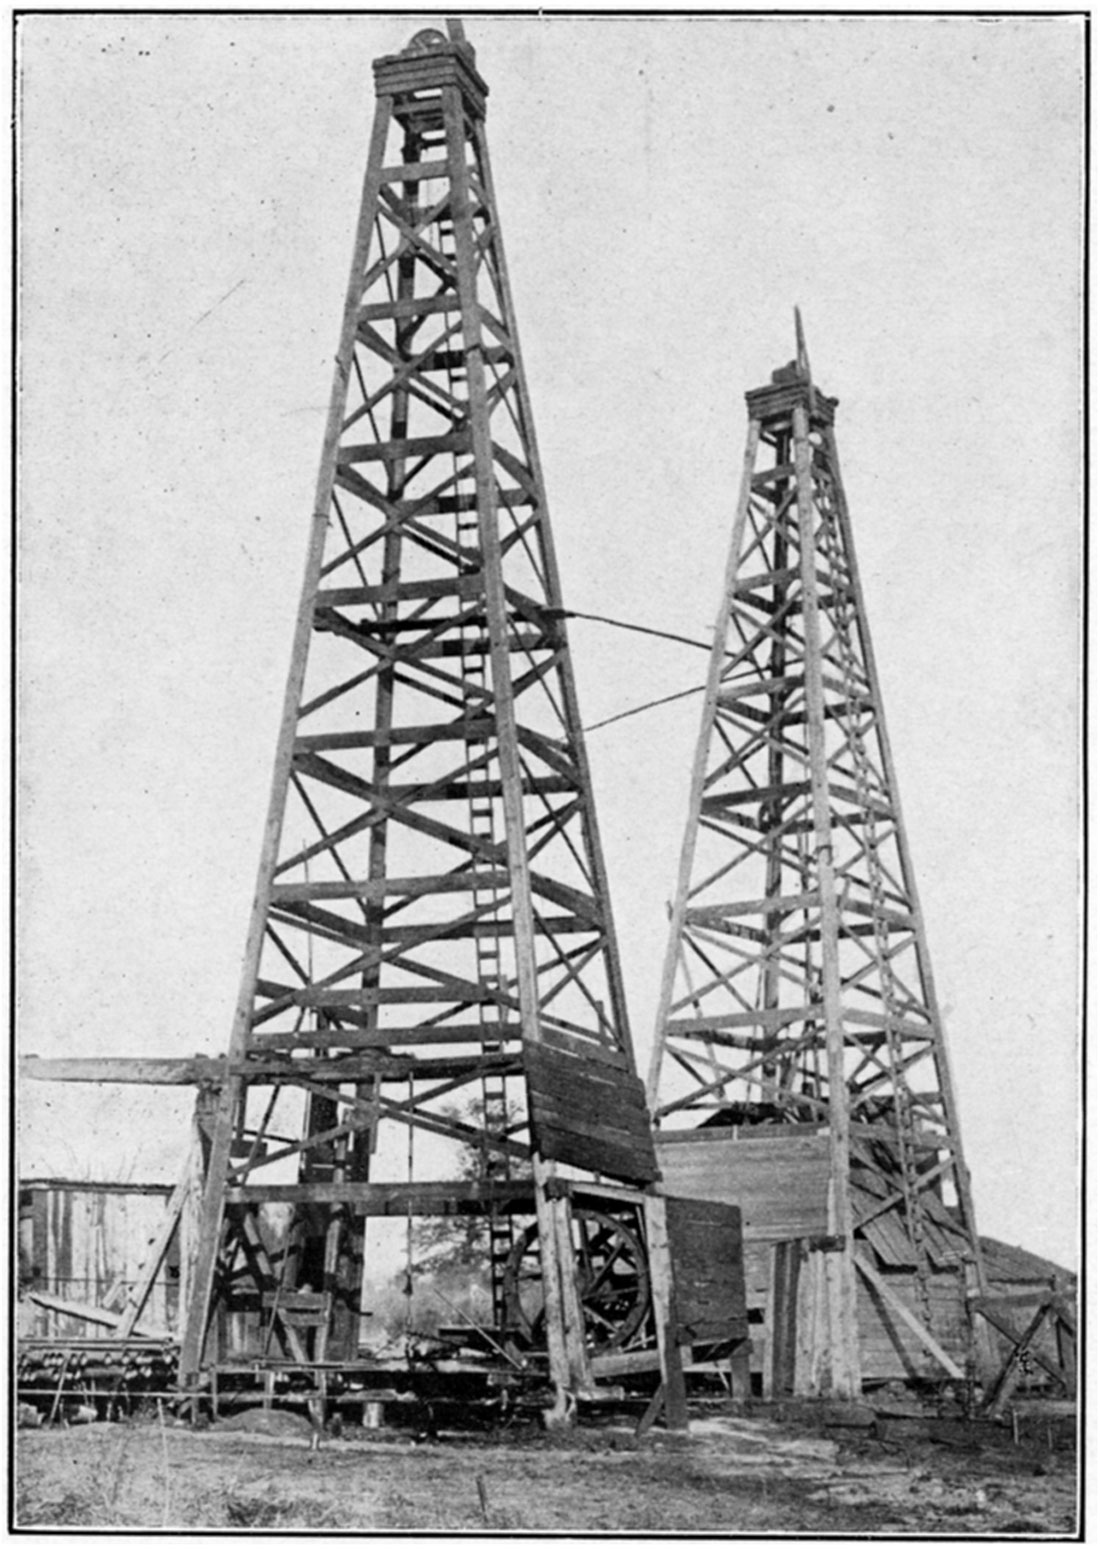 Black and white photo of the standard derrick.